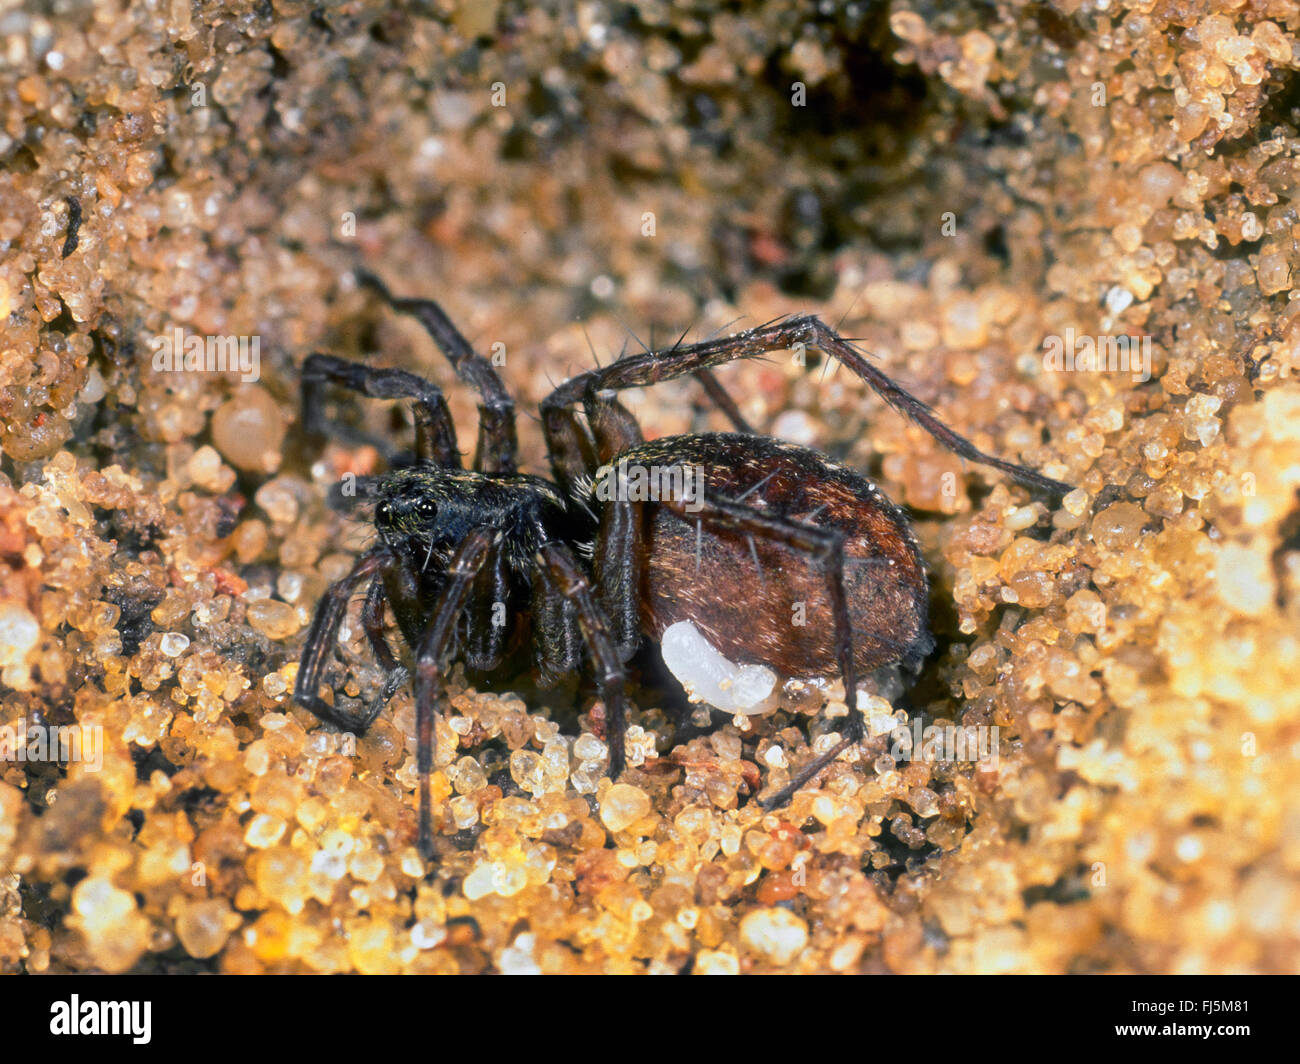 Black-banded spider wasp (Anoplius viaticus, Anoplius fuscus, Pompilus viaticus), Paralyzed Wolf Spider (Lycosidae) with an egg of the wasp in the brood chamber, Germany Stock Photo